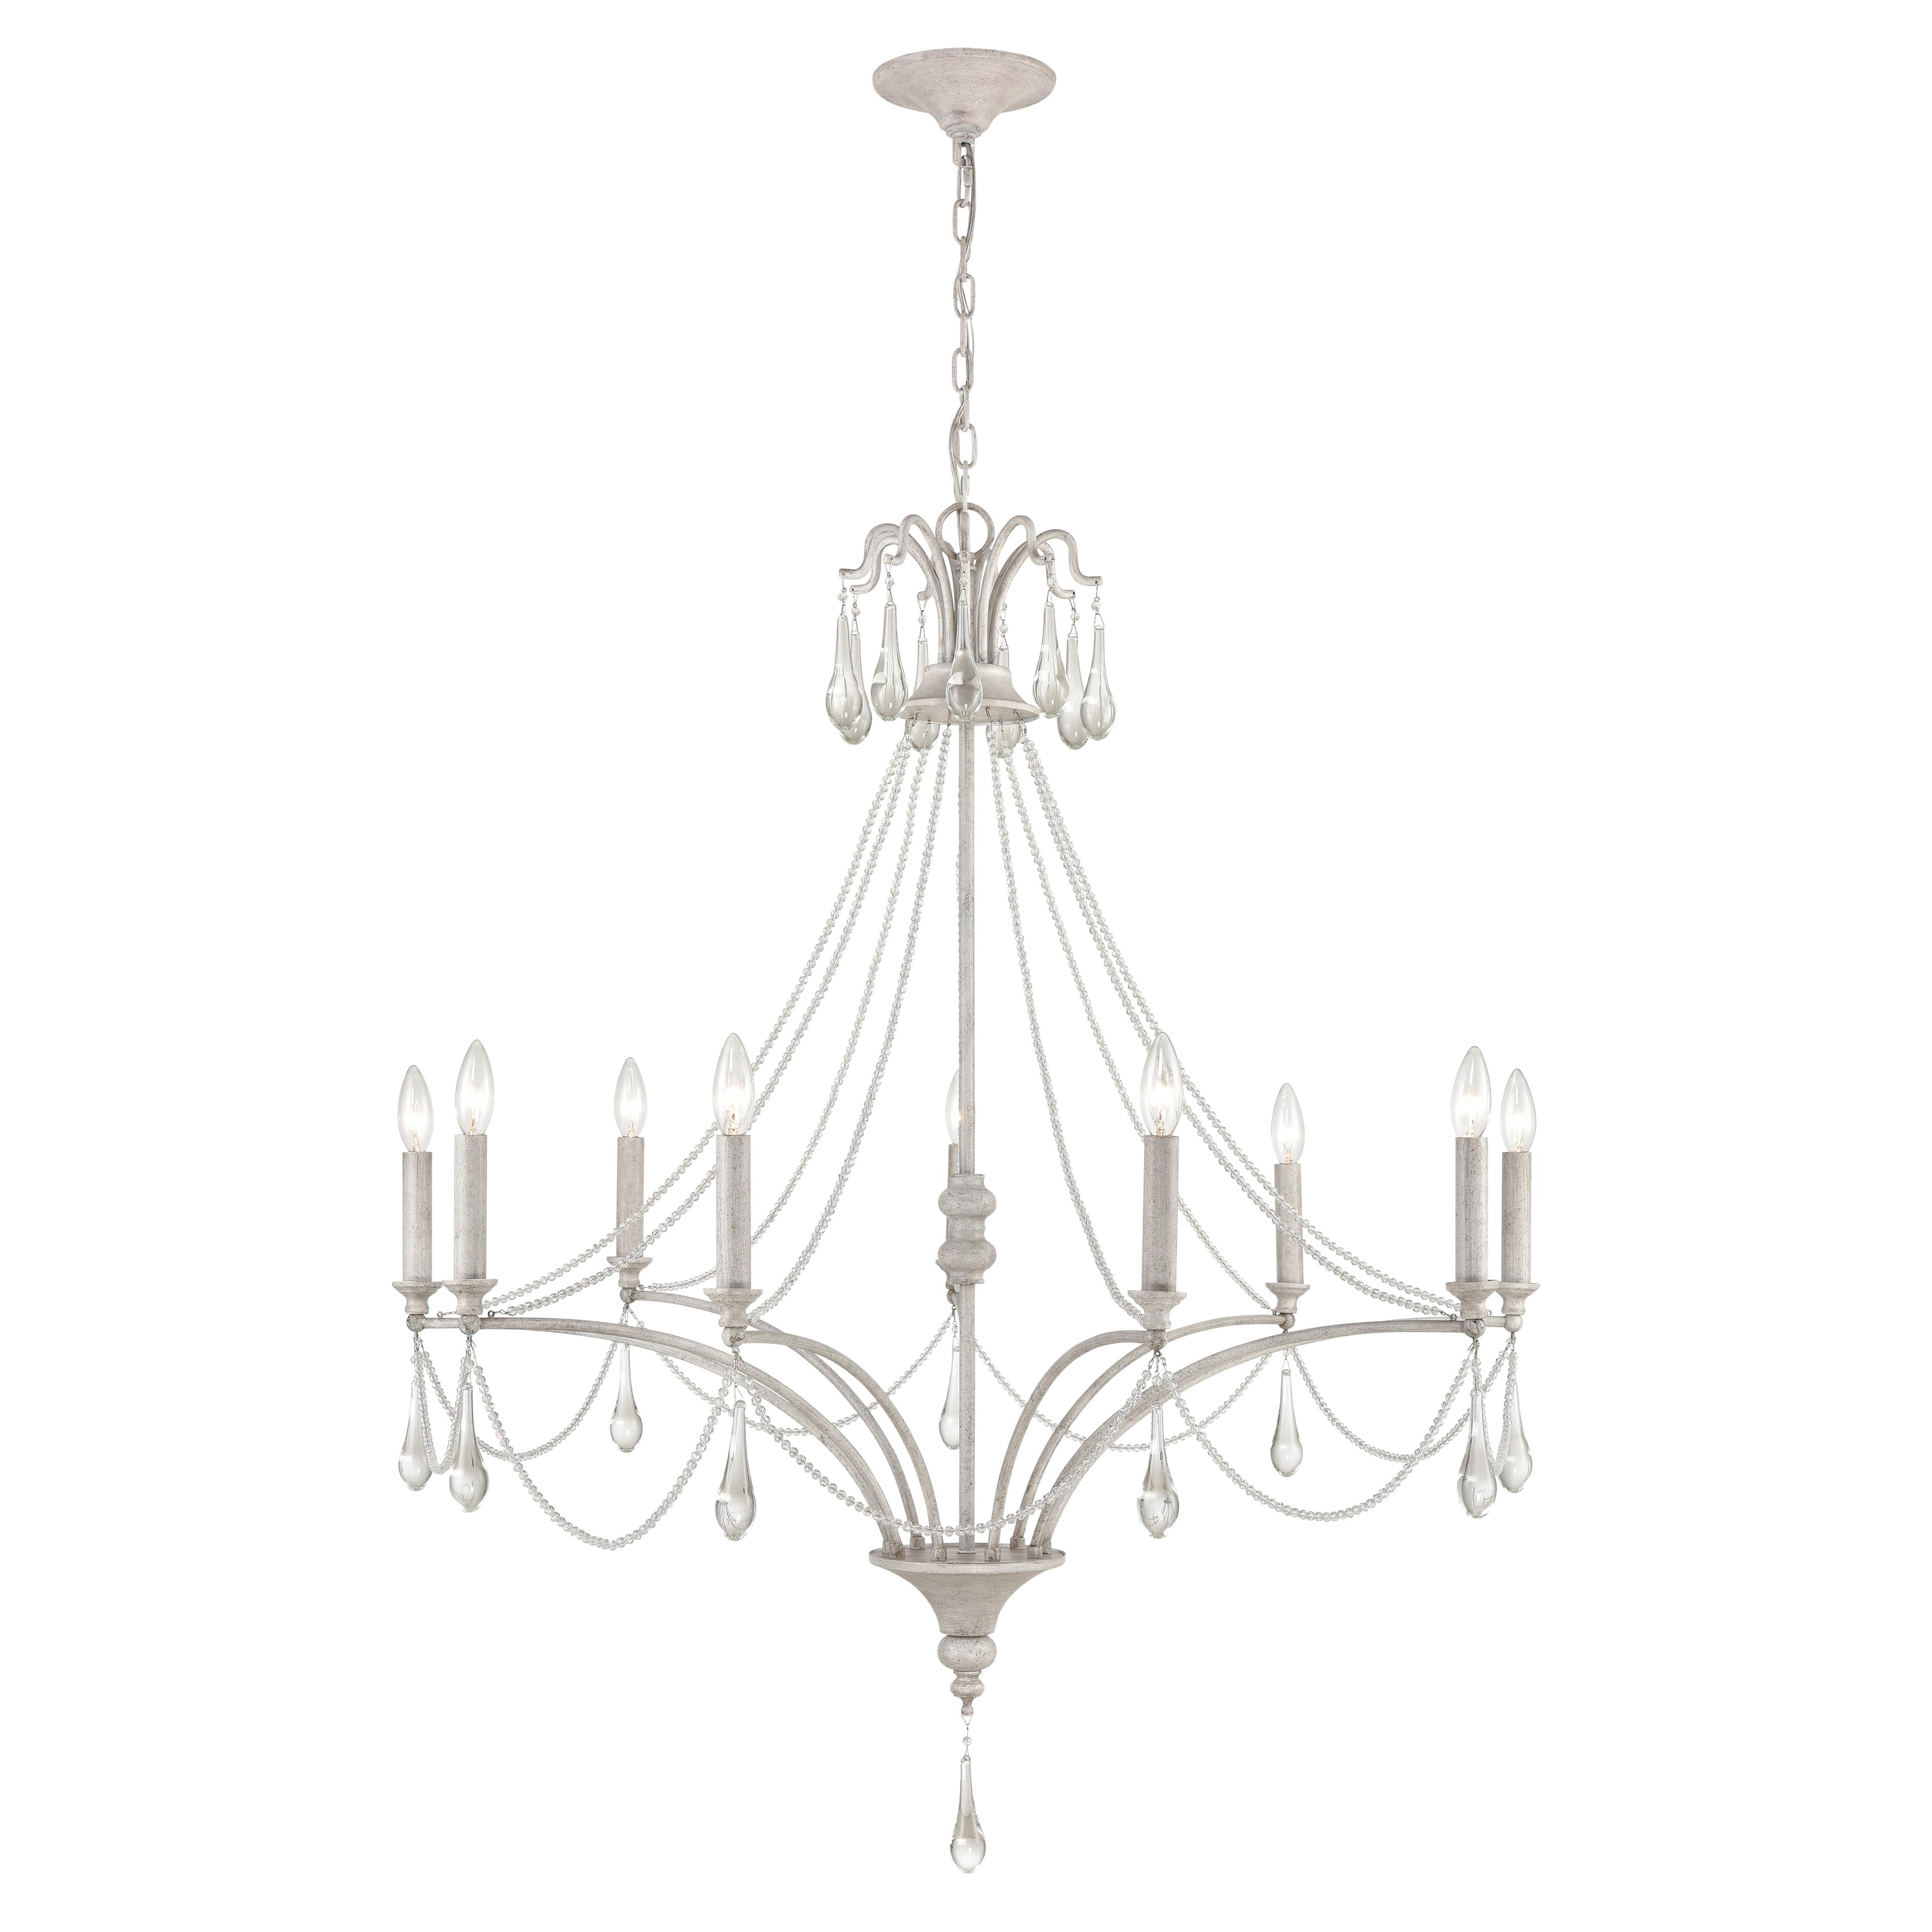 Vintage White French Parlor 9-Light Crystal Chandelier